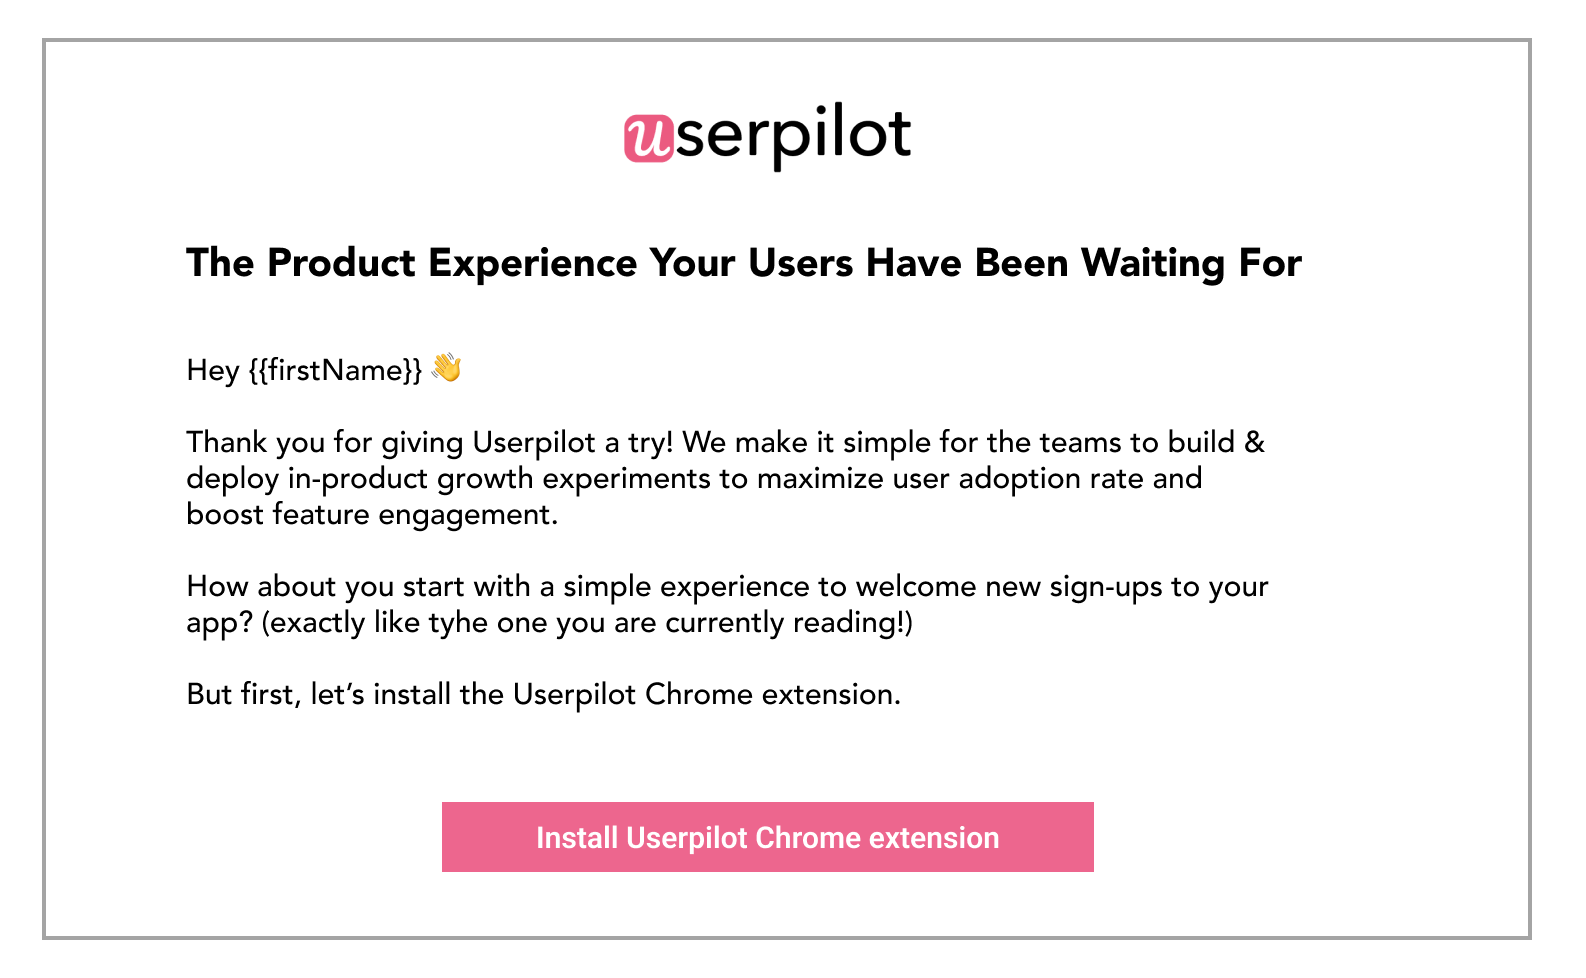 The Userpilot welcome screen message and request to install its Chrome extension.